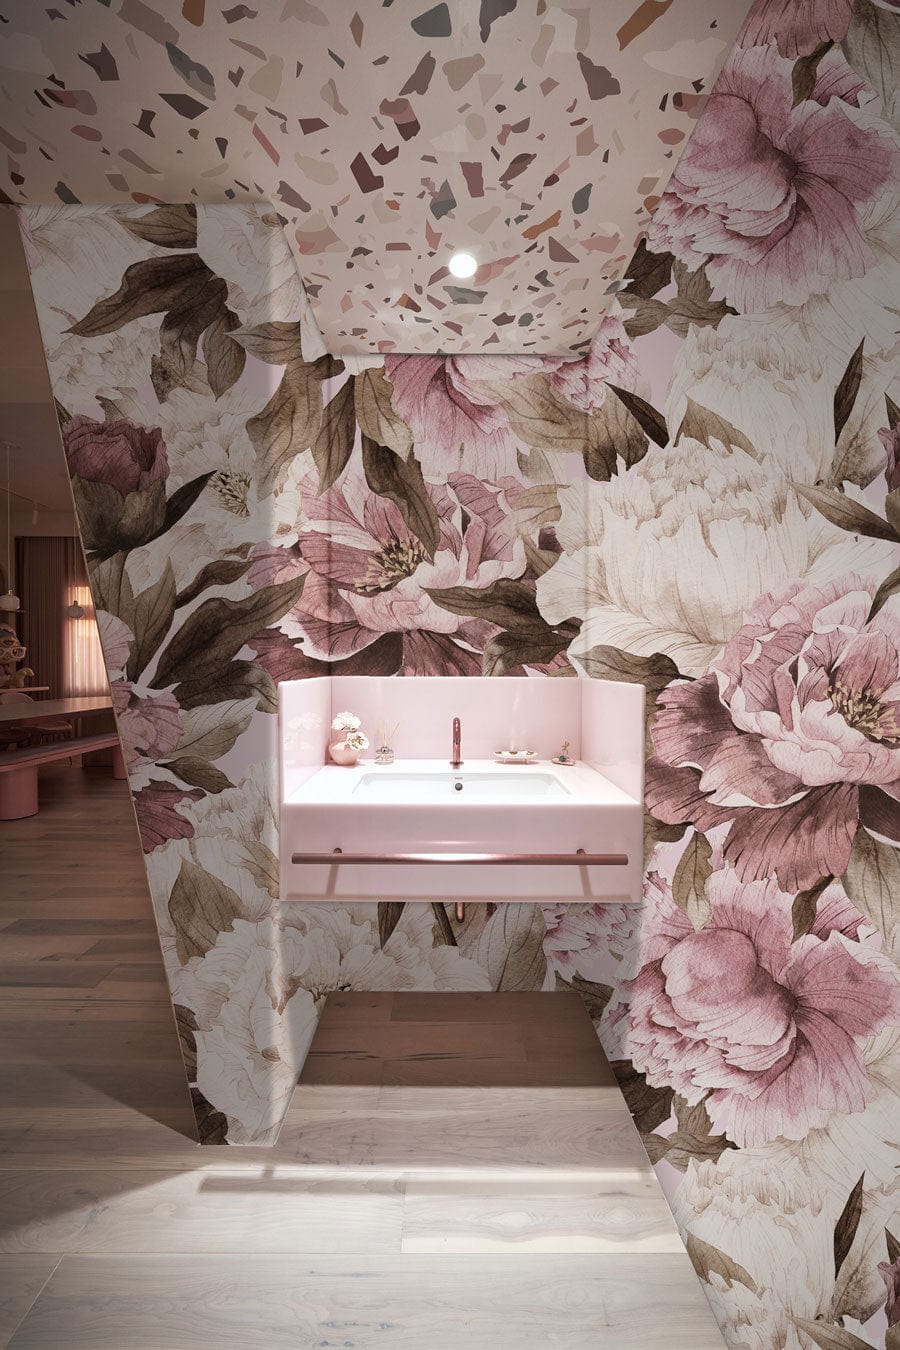 Wall mural paper for the bathroom decorated with pink and white flowers